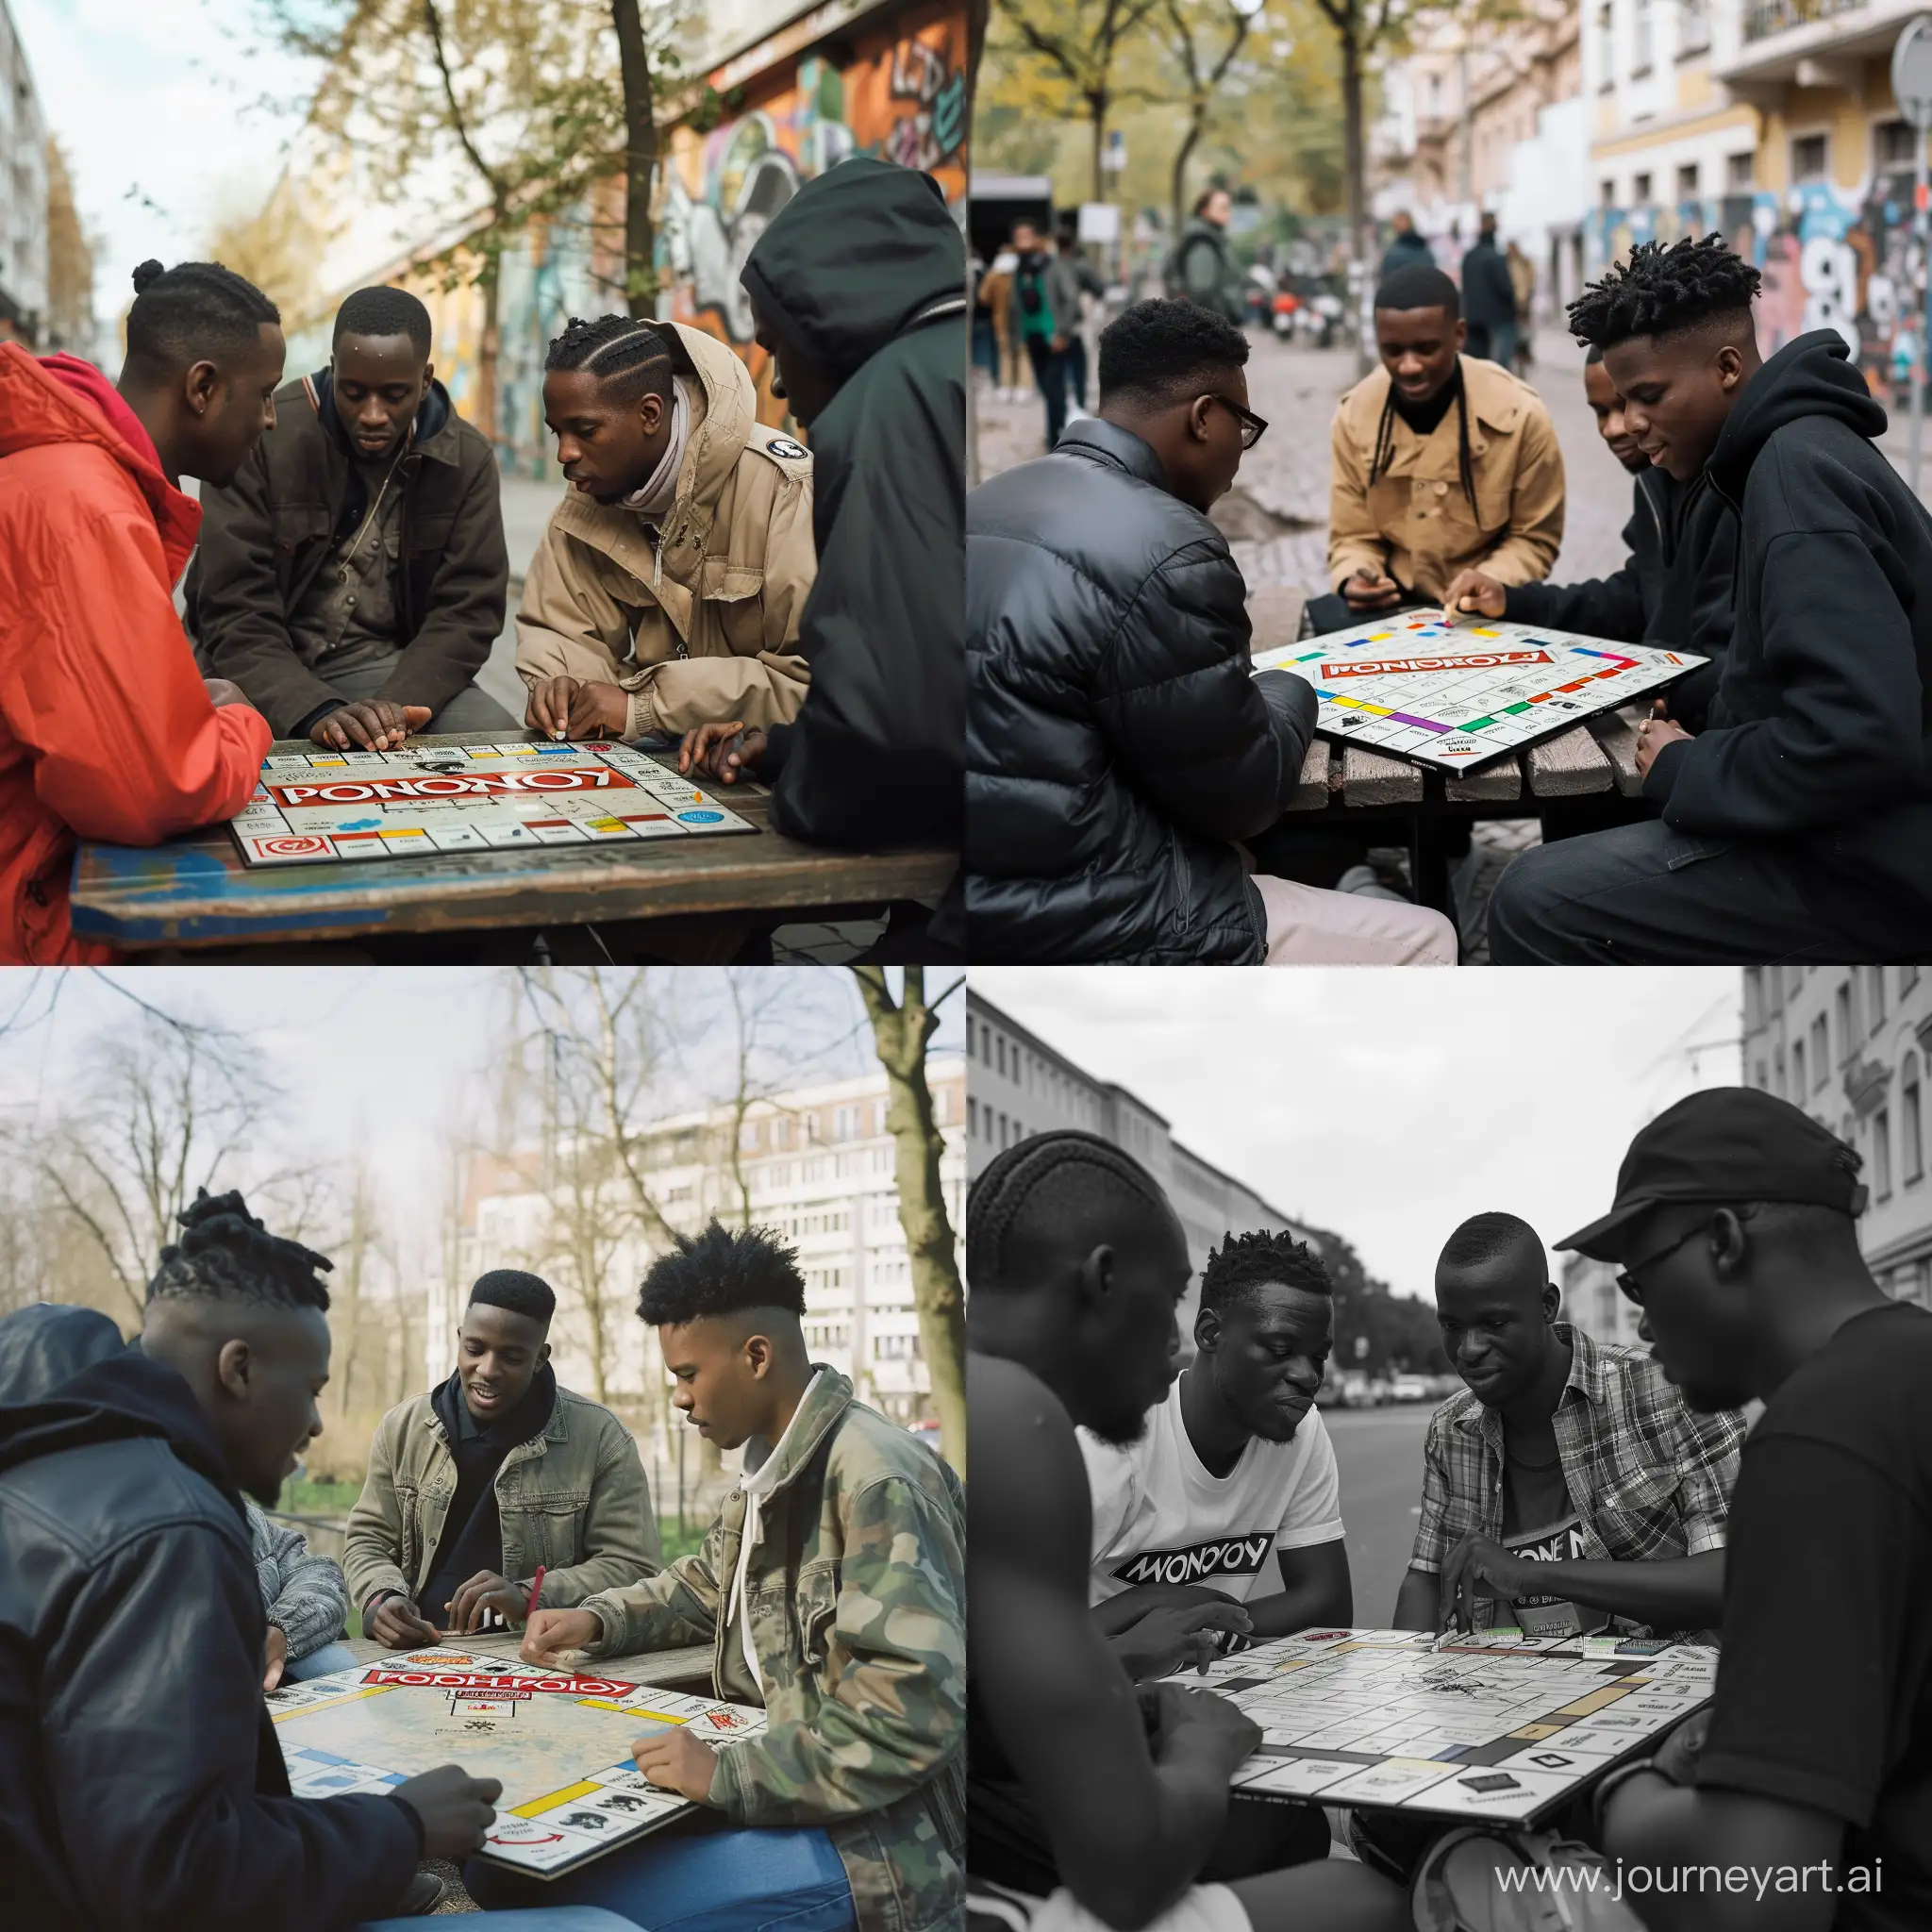 Vibrant-Scene-of-Four-Friends-Playing-Monopoly-in-Berlin